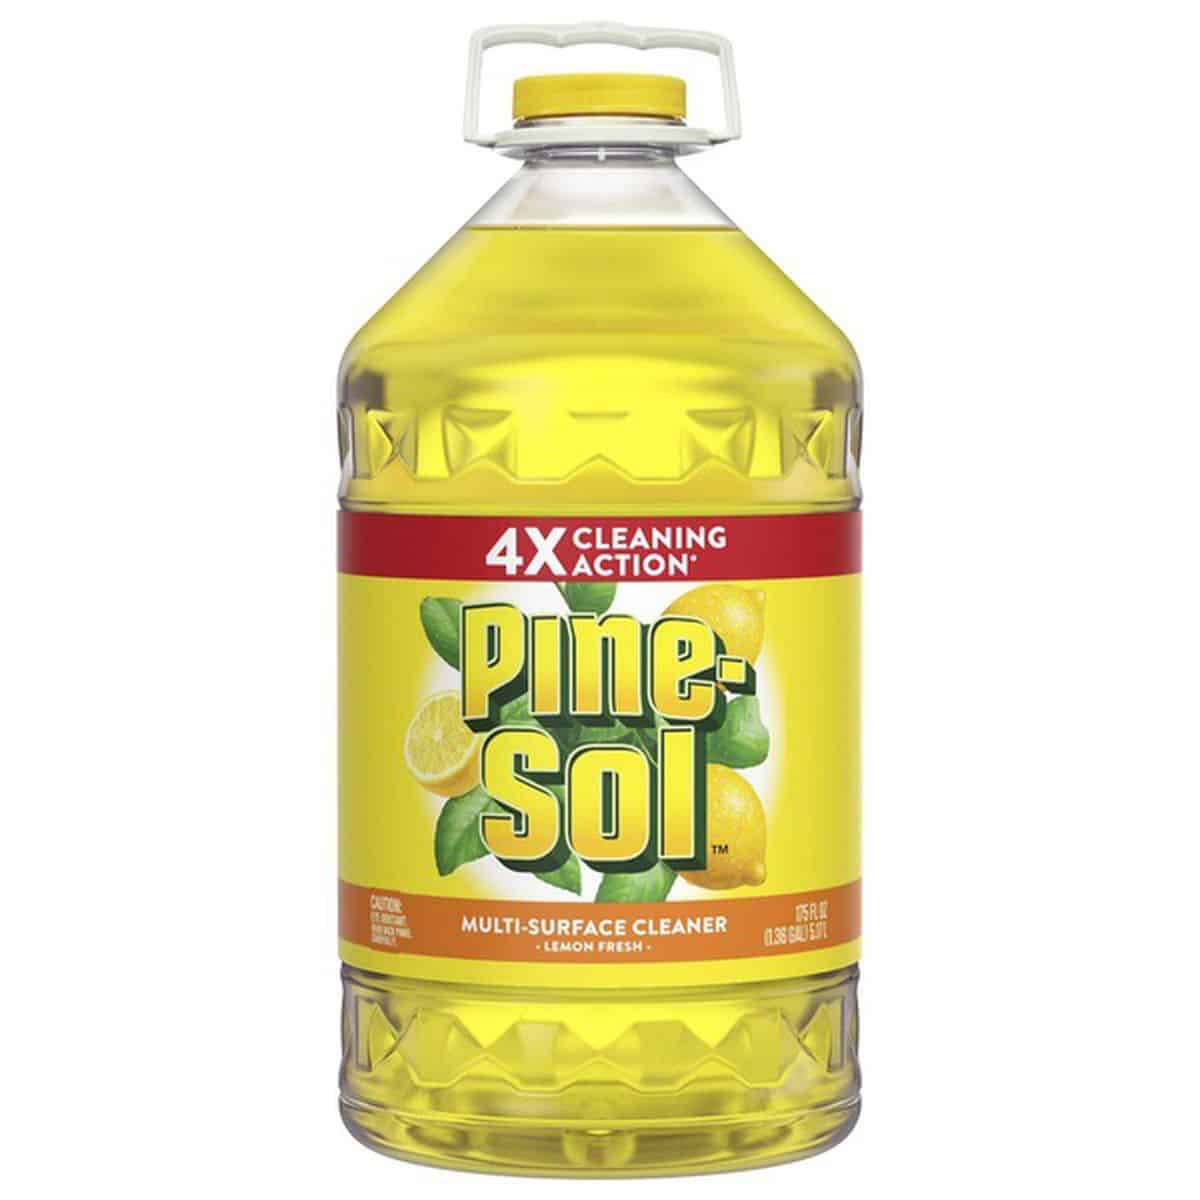 Pine-Sol Dilutable Cleaner 175 fl oz